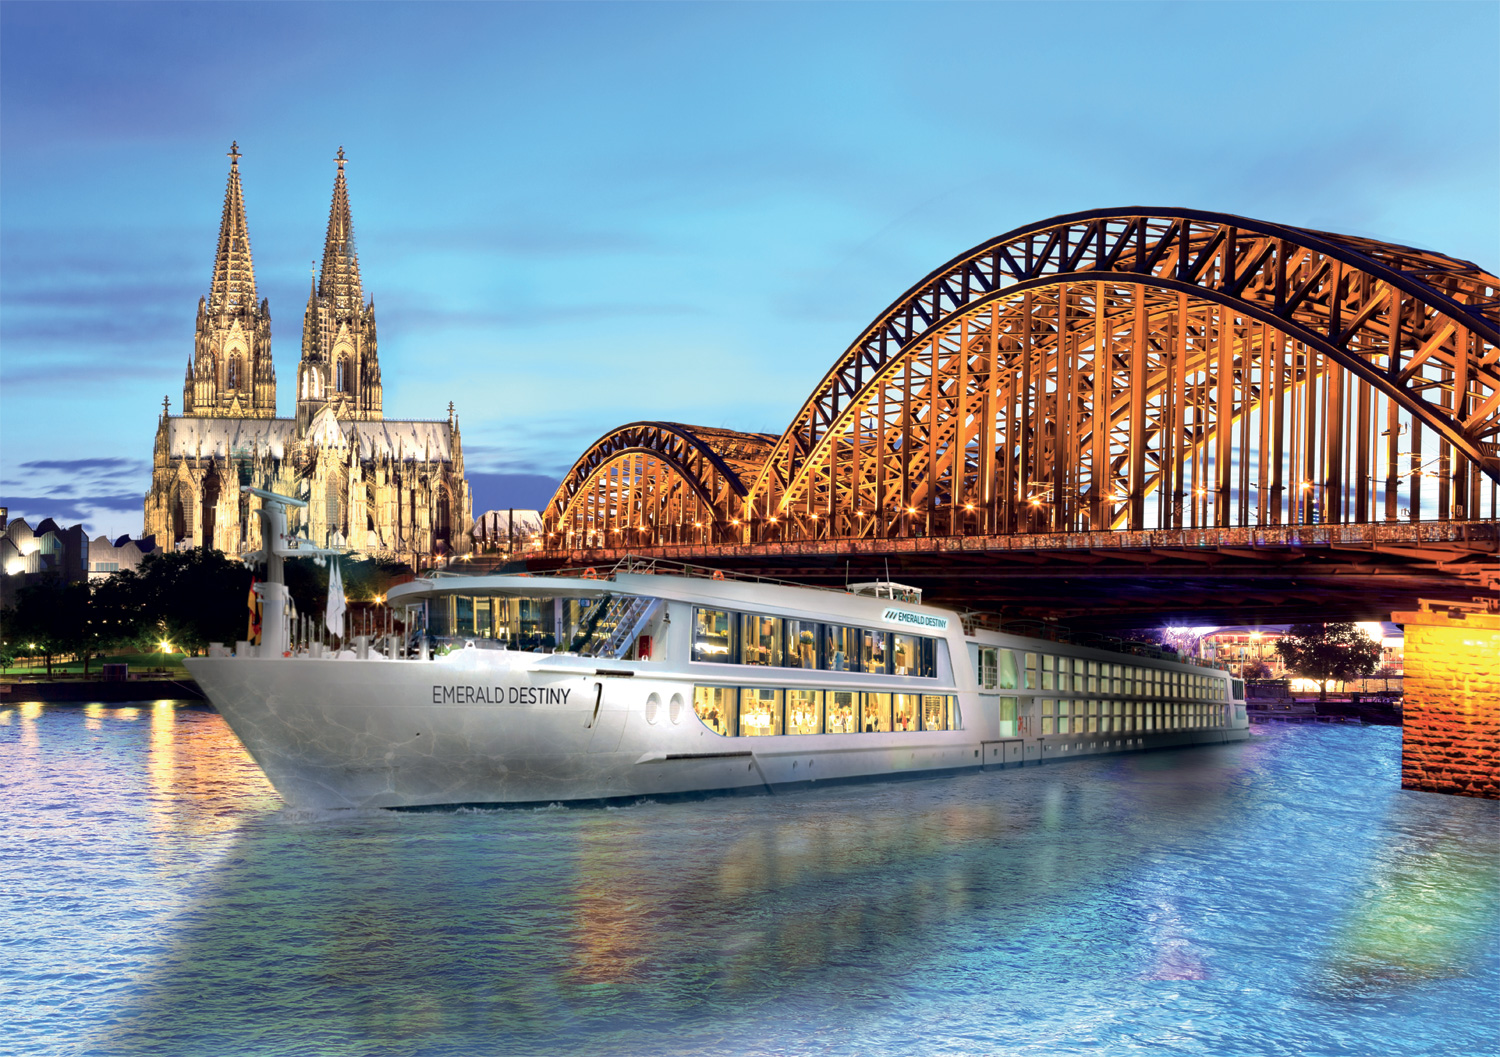 River Cruises For History Buffs On The Rhine, Danube And Nile